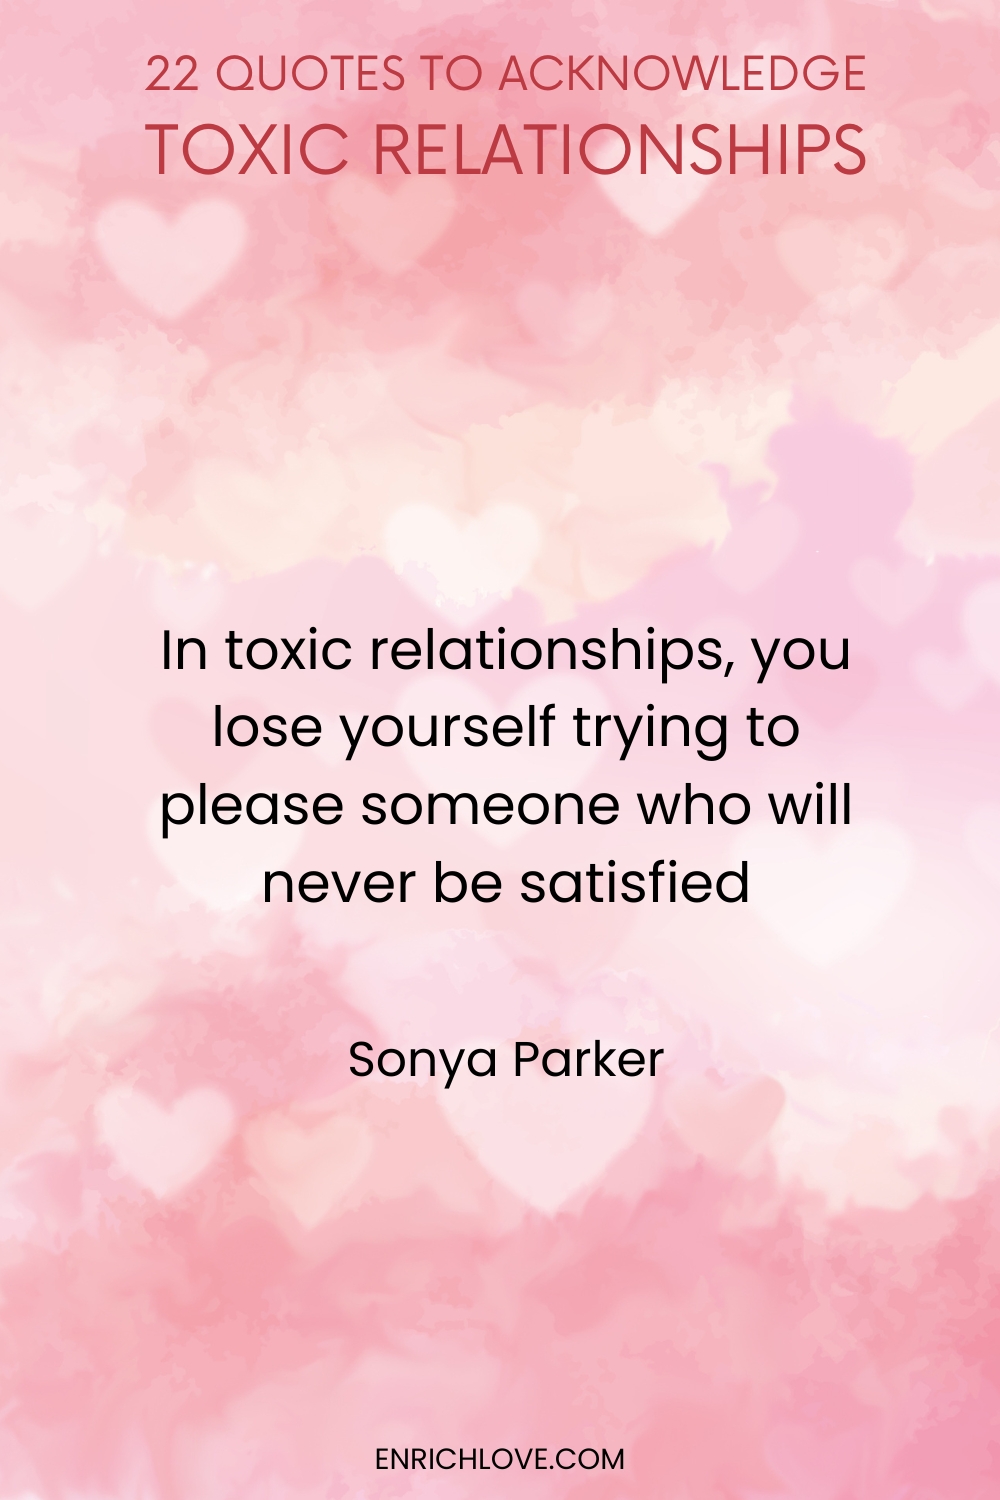 22 Quotes to Acknowledge Toxic Relationships -In toxic relationships, you lose yourself trying to please someone who will never be satisfied by Sonya Parker